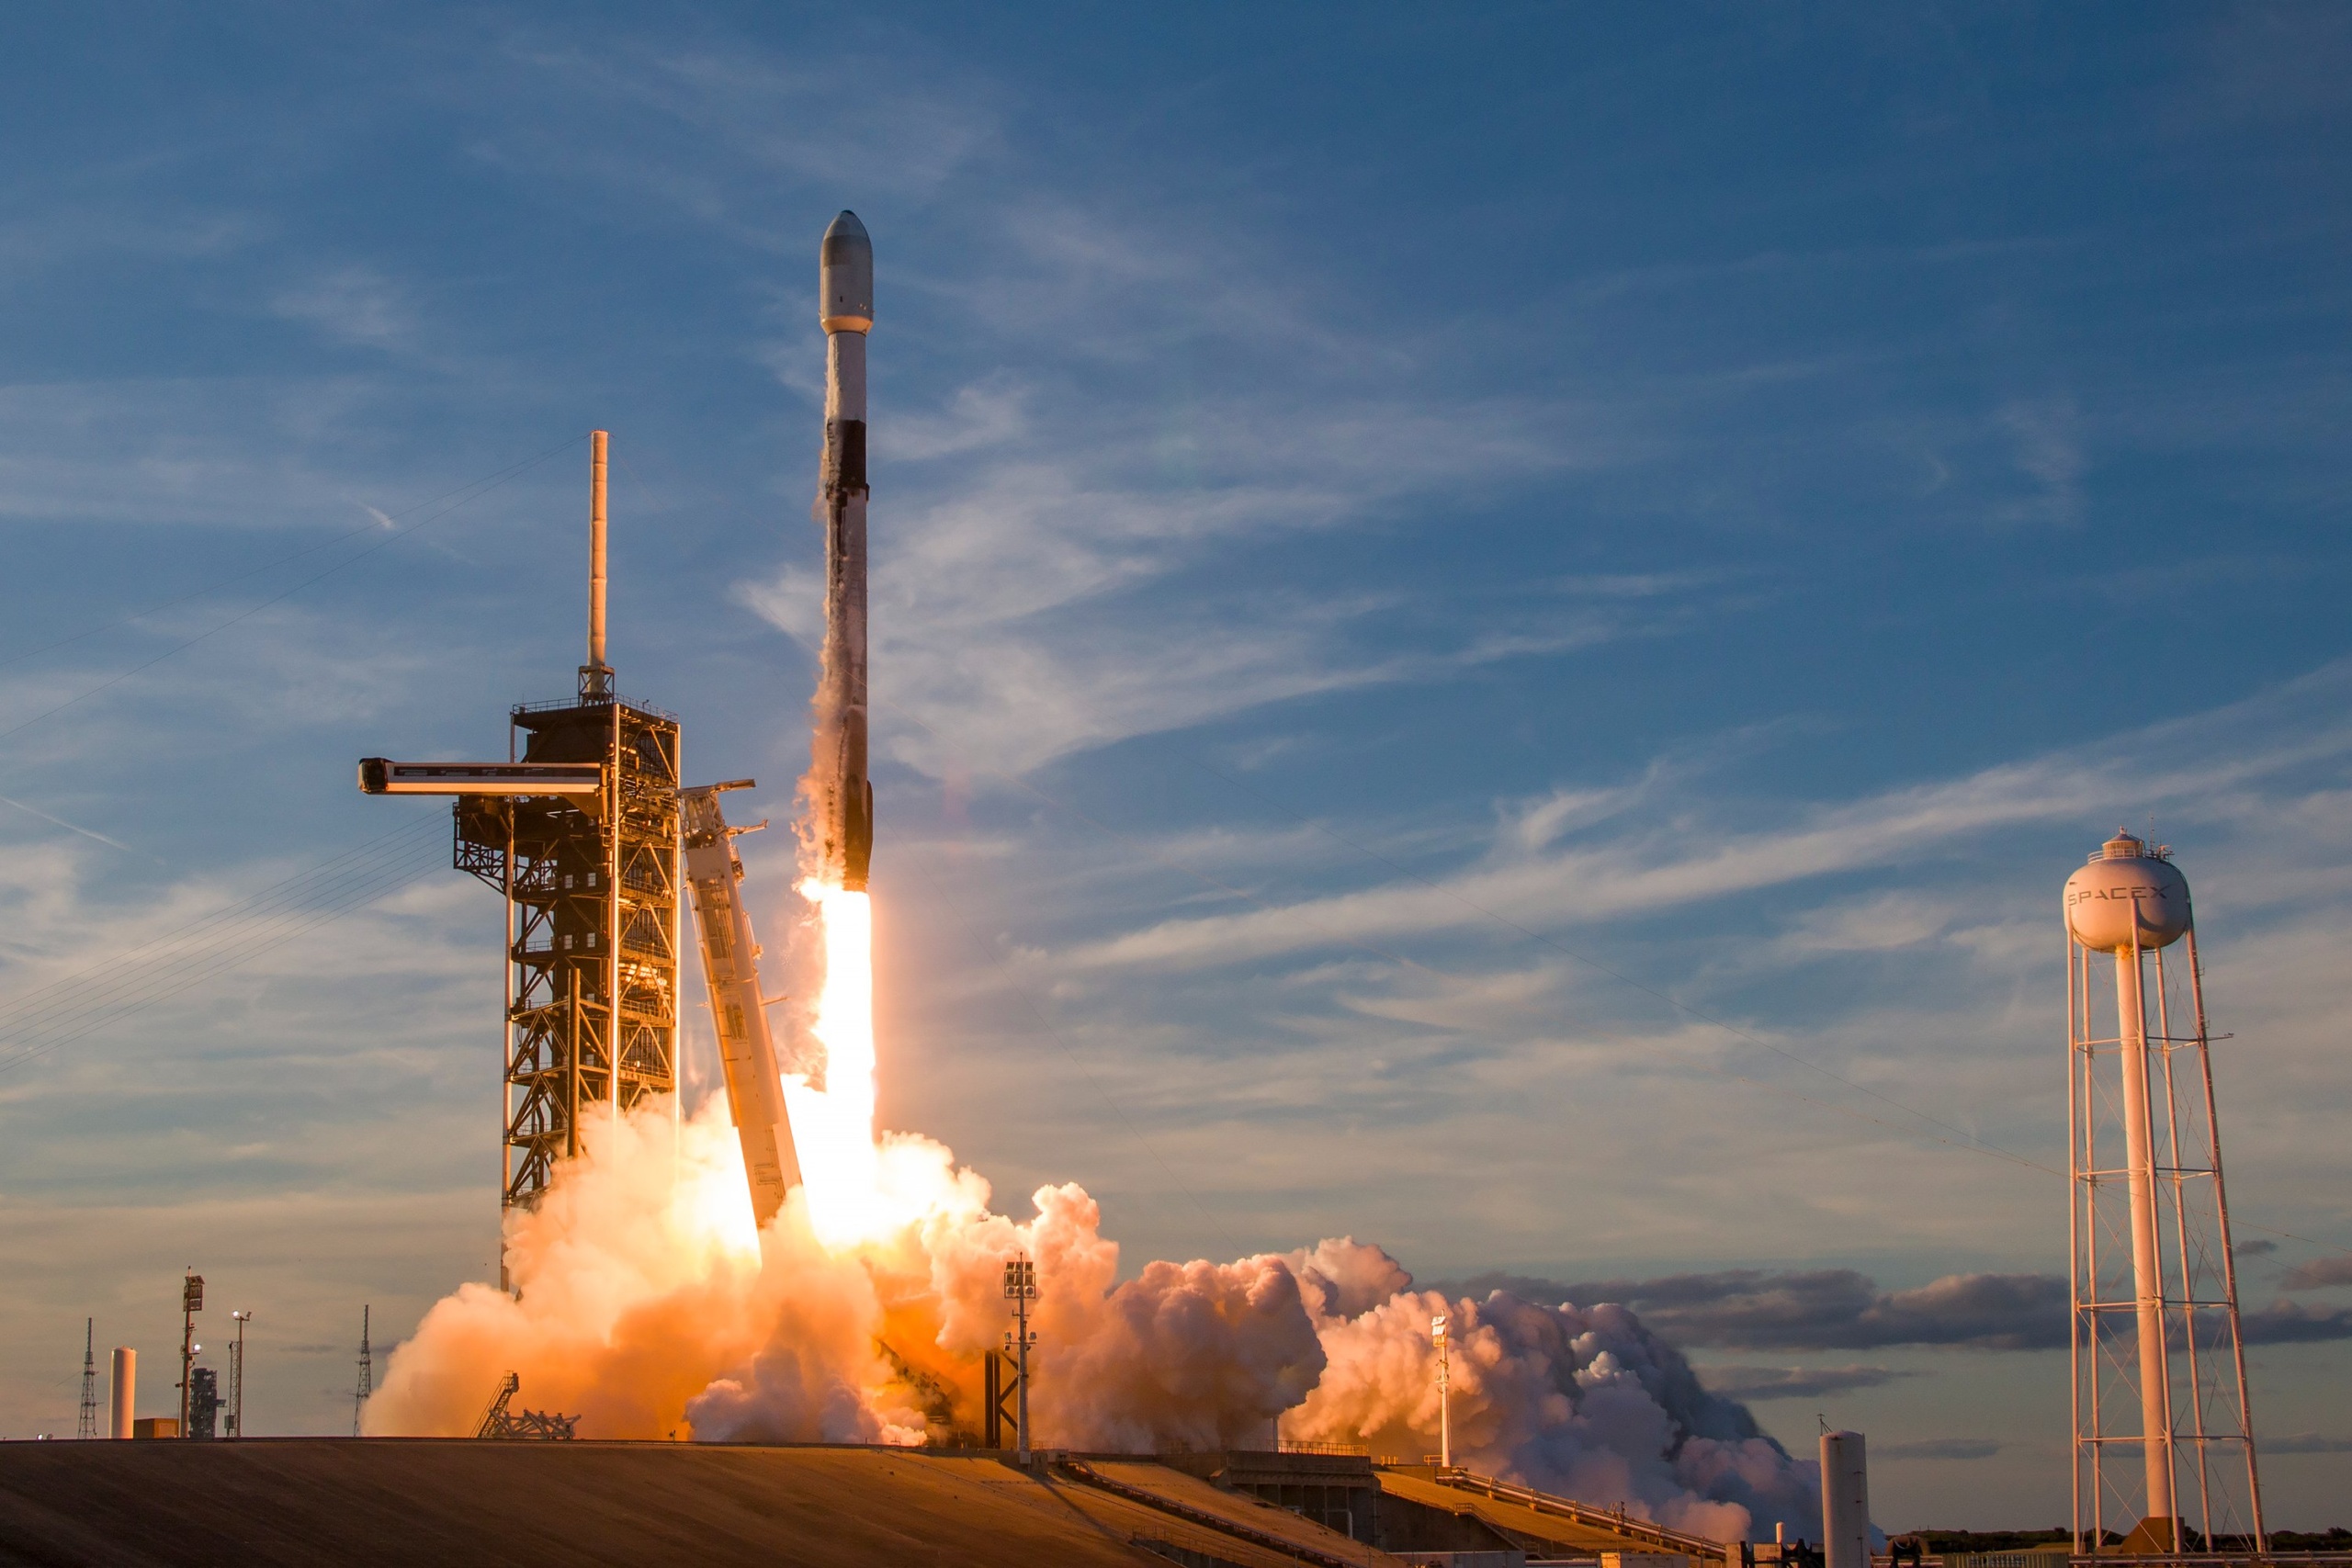 The Payload in the $1.8 Trillion Space Economy